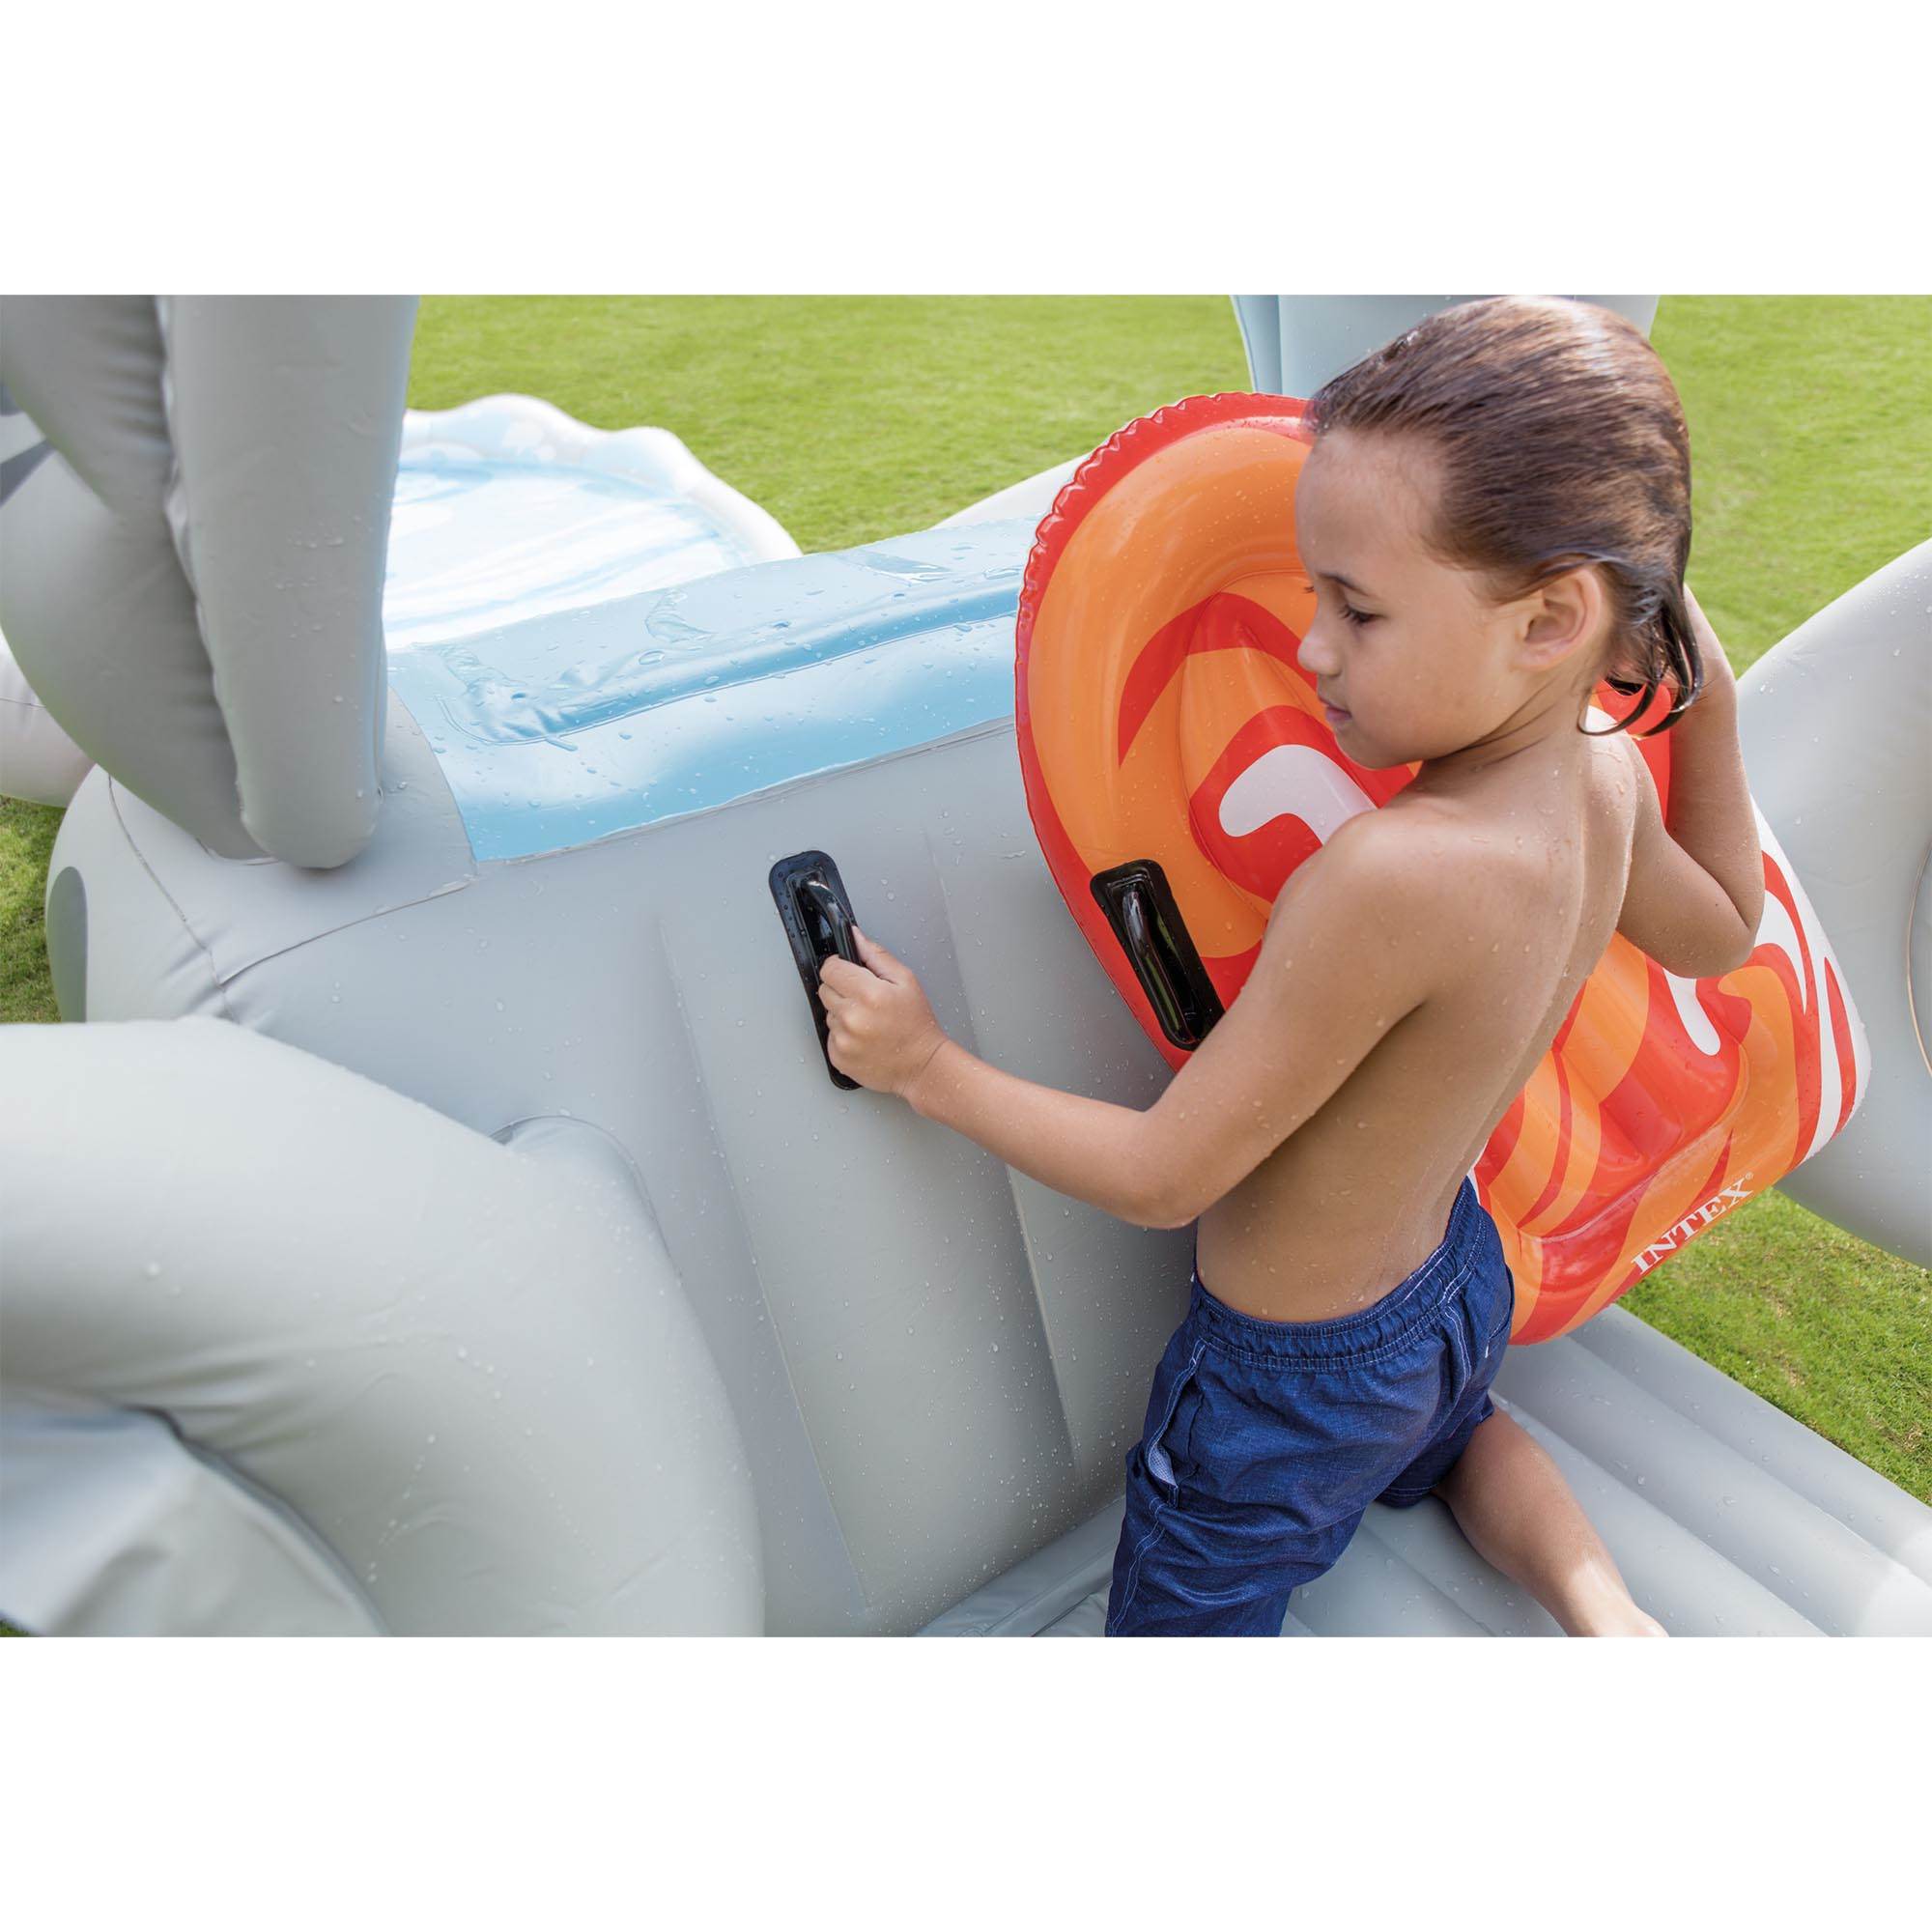 New Intex Water Surf 'N Slide Inflatable Play Center 181" x 66" x 62" SHIPS FAST 